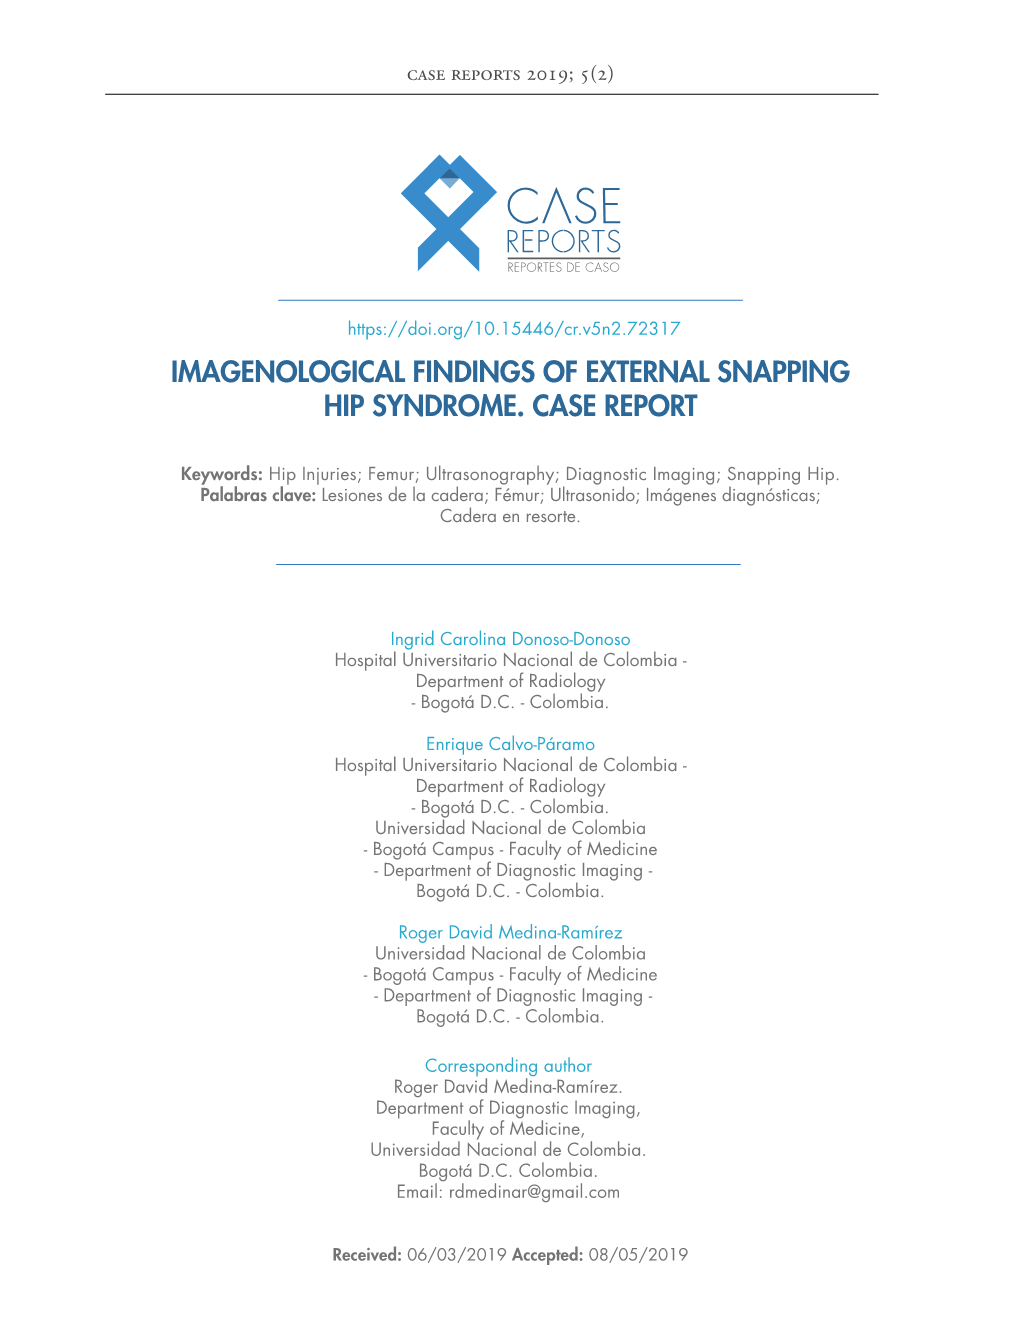 Imagenological Findings of External Snapping Hip Syndrome. Case Report